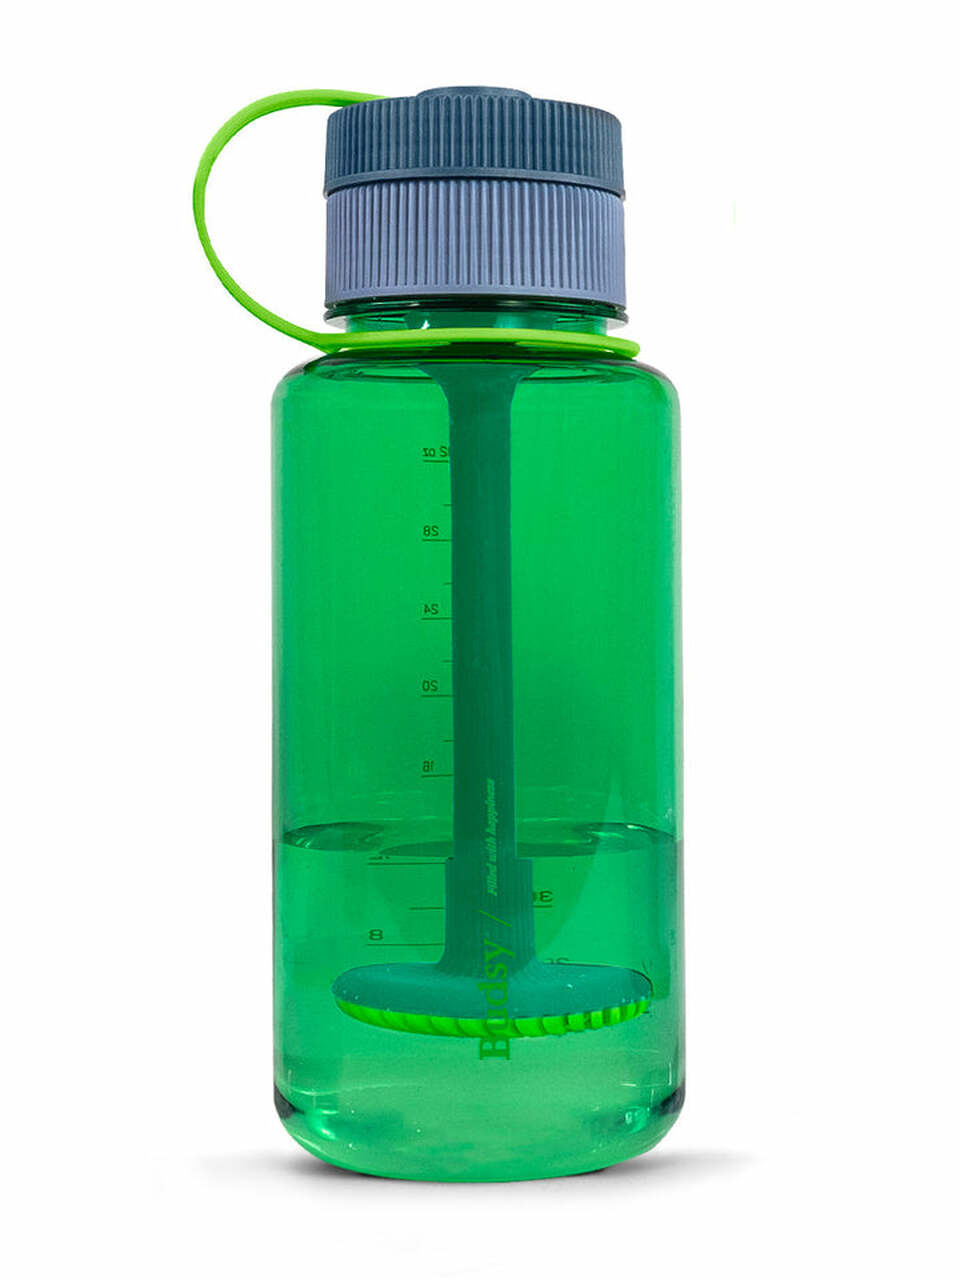 PUFFCO BUDSY - WATER BOTTLE PIPE